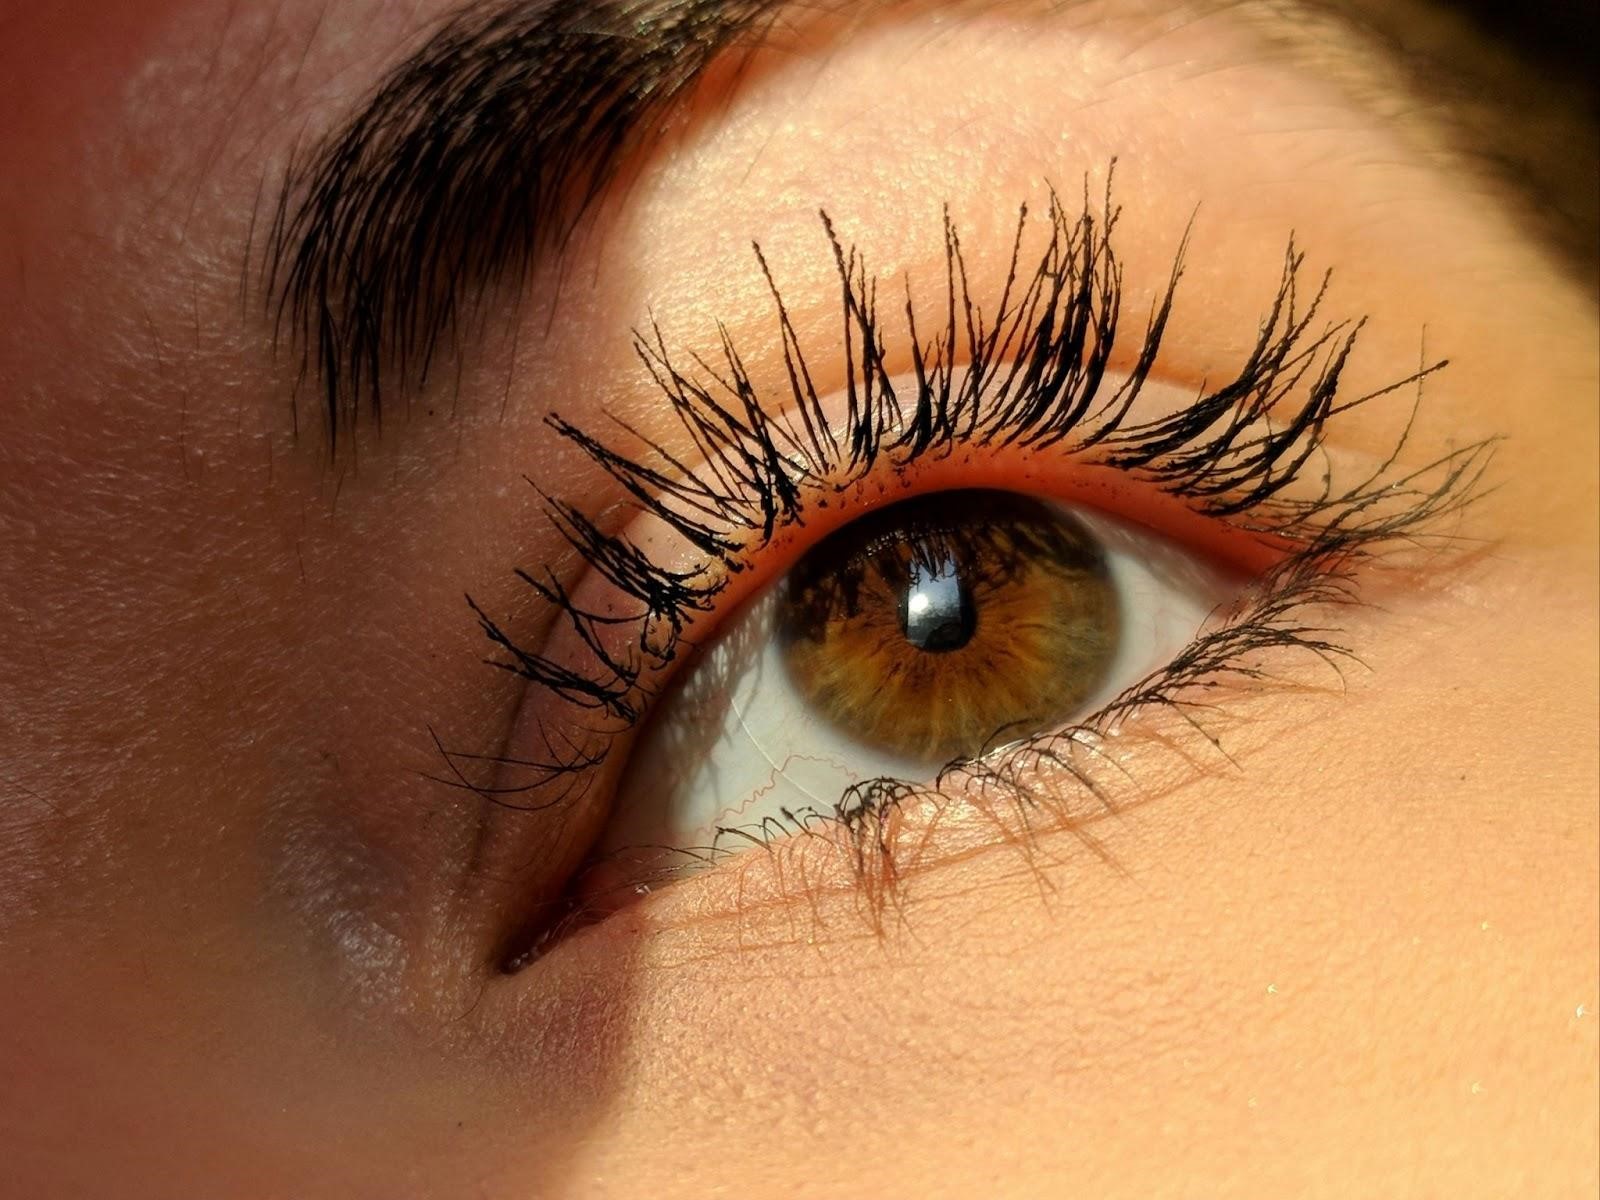 Longer-Looking Lashes